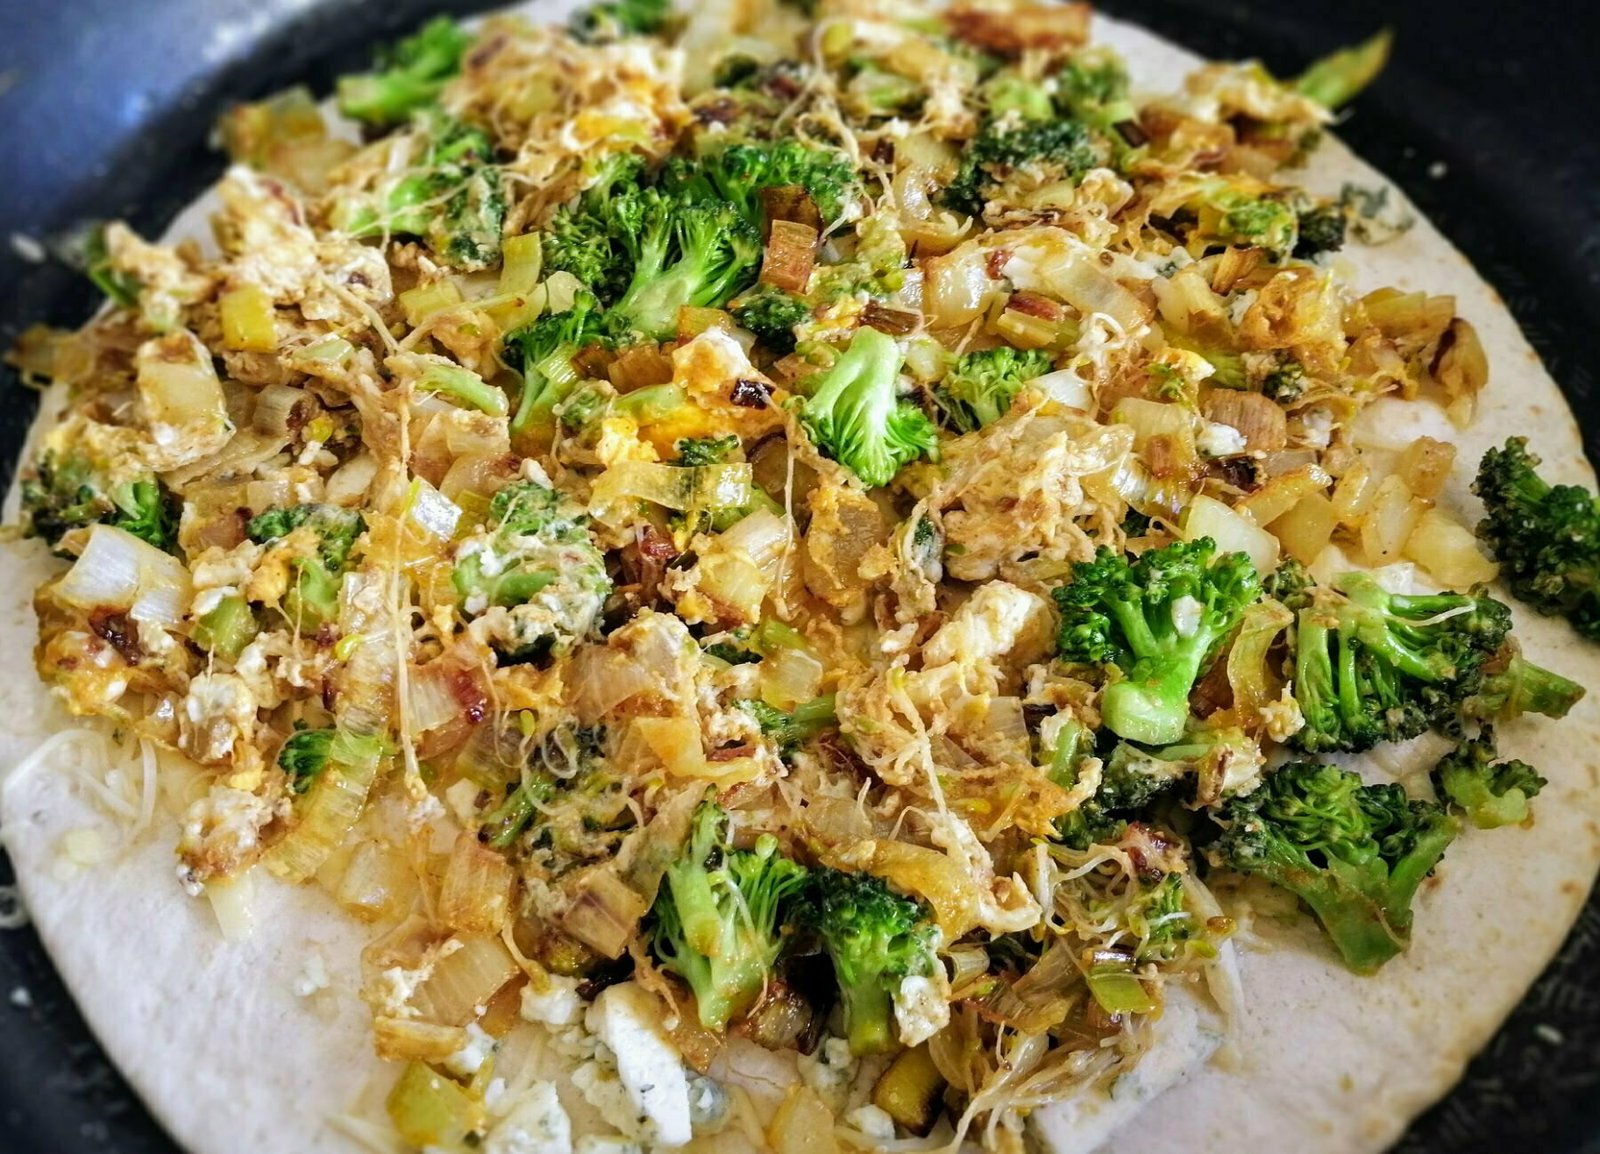 An opened quesadilla sits in a pan with leek brocolli and blue cheese sprinkled on top